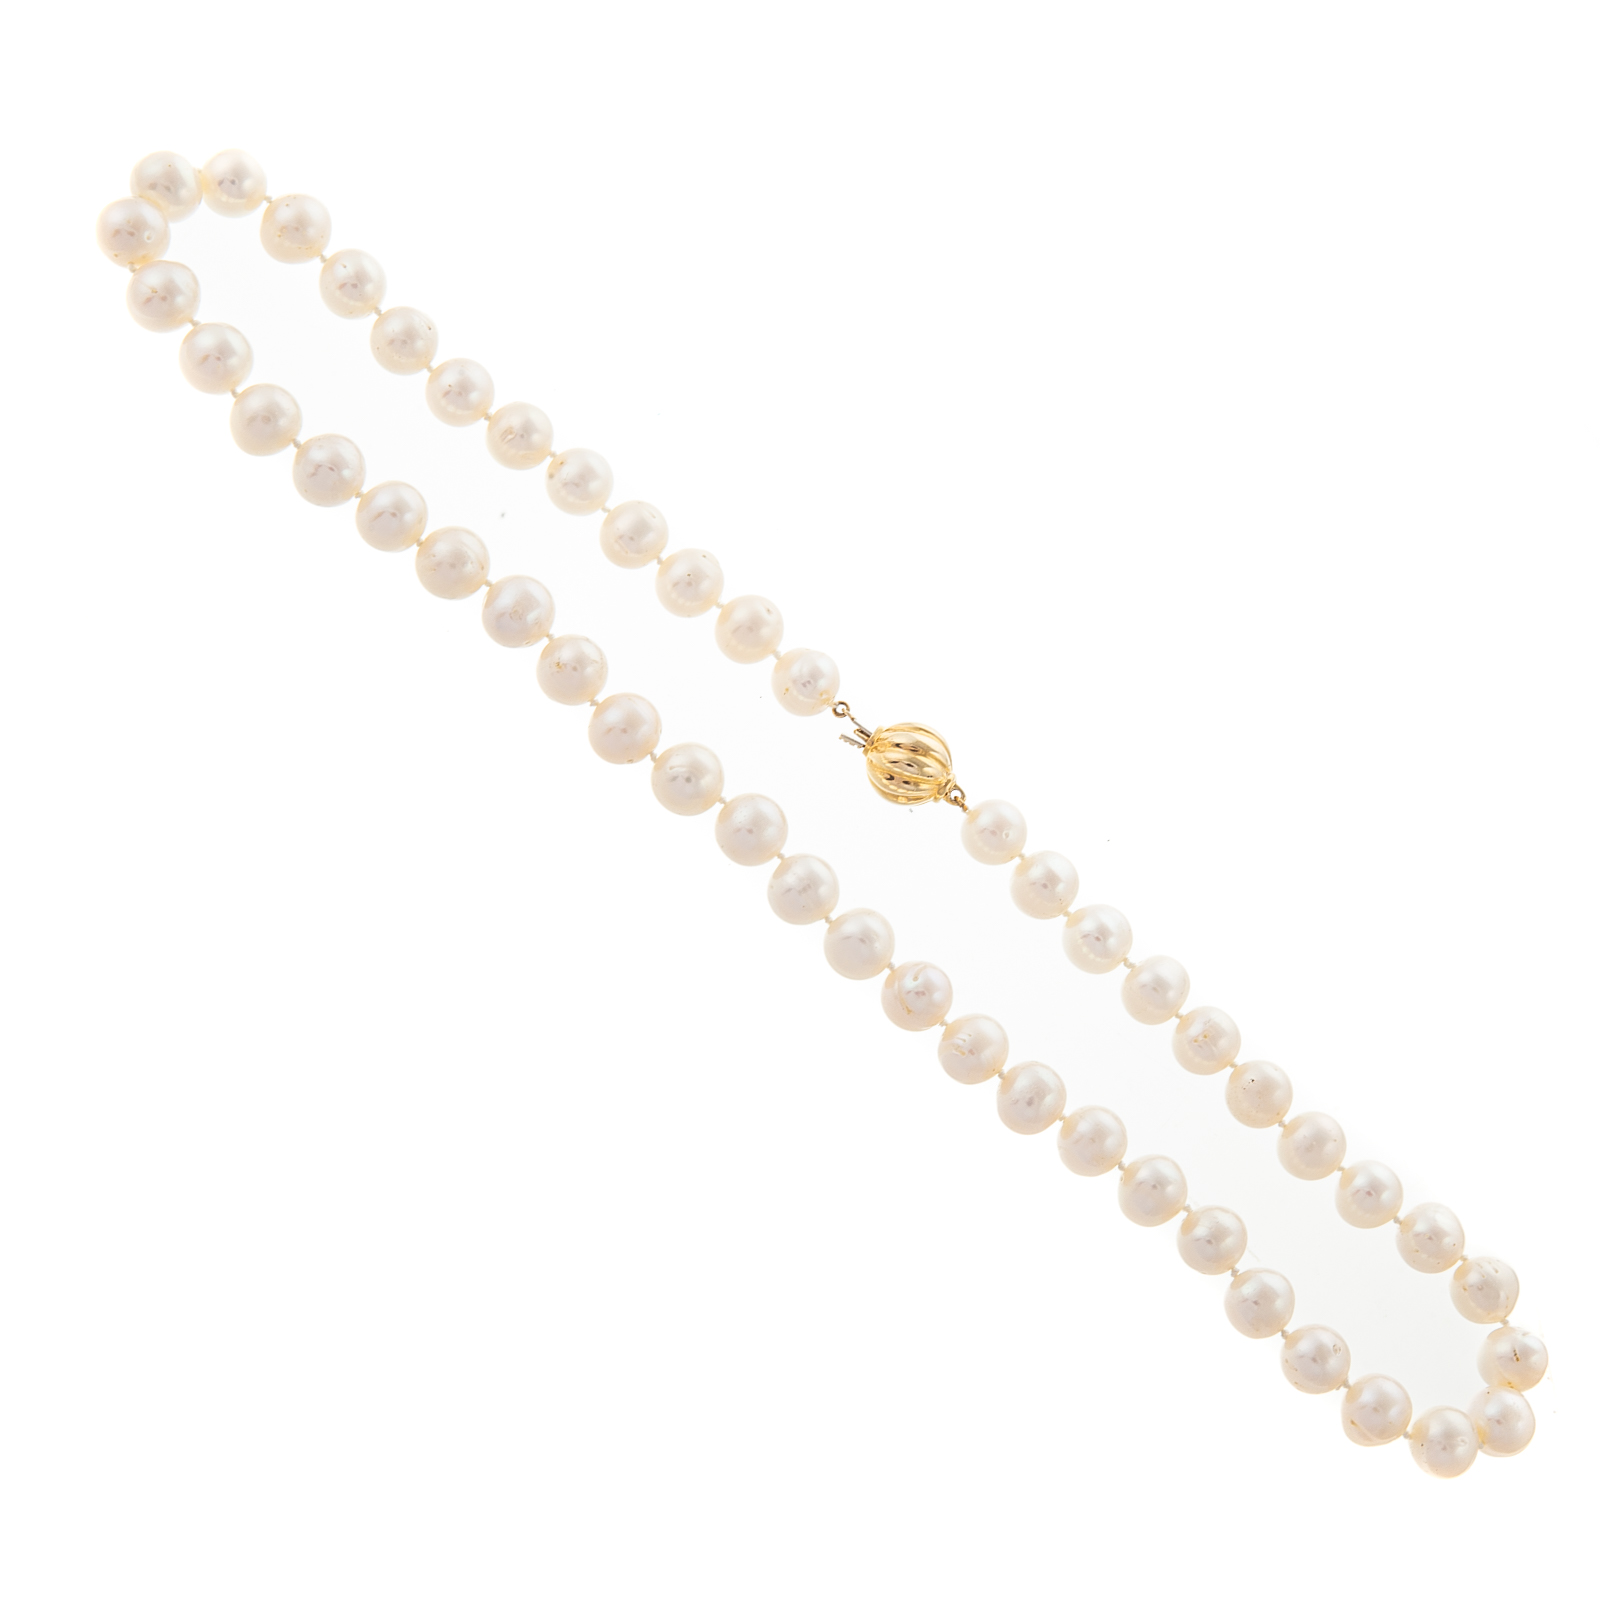 A 10 MM FRESH WATER PEARL NECKLACE 29df74